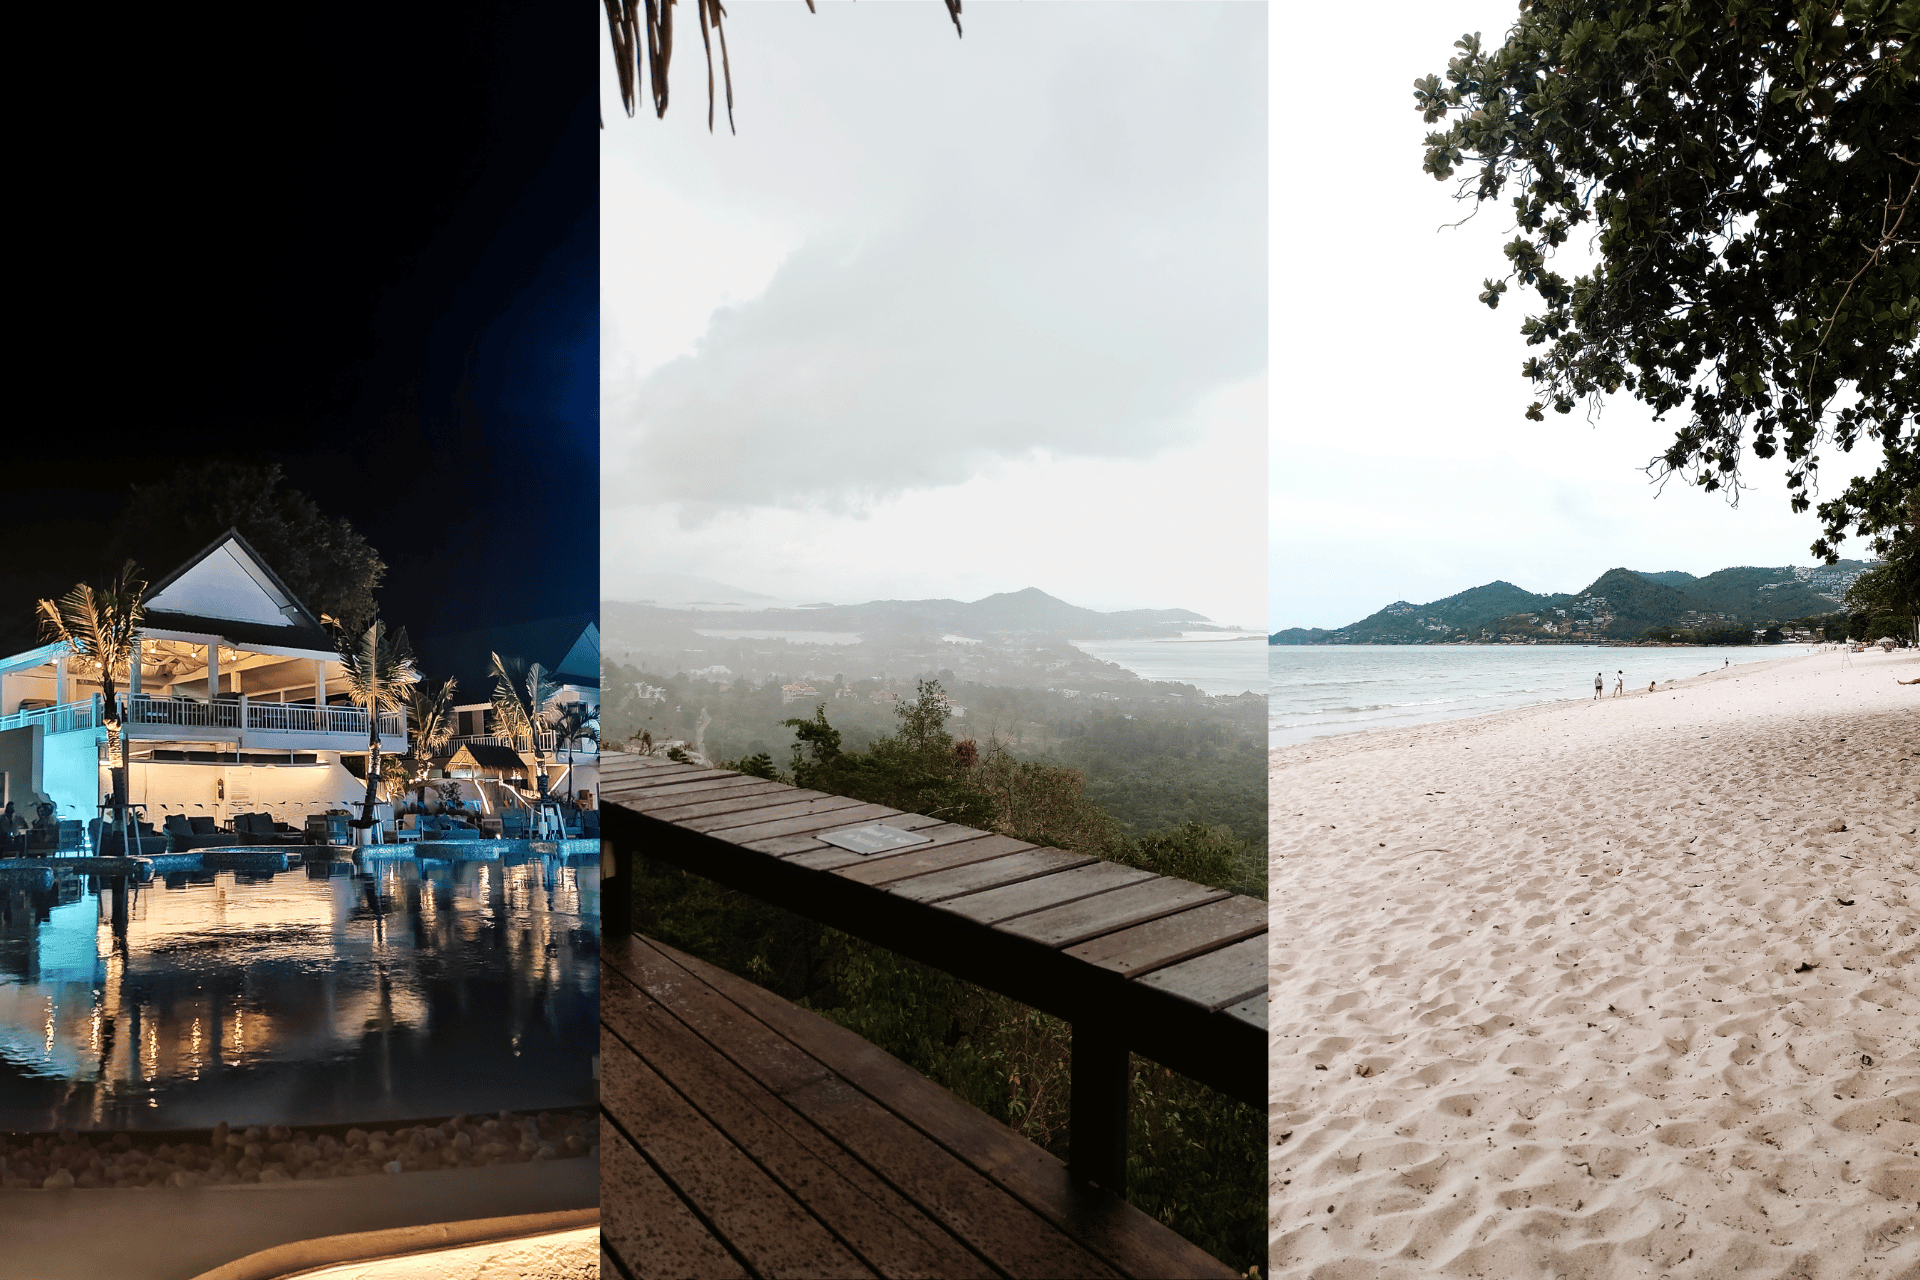 Come with us to Thailand: 48 hours in Koh Samui